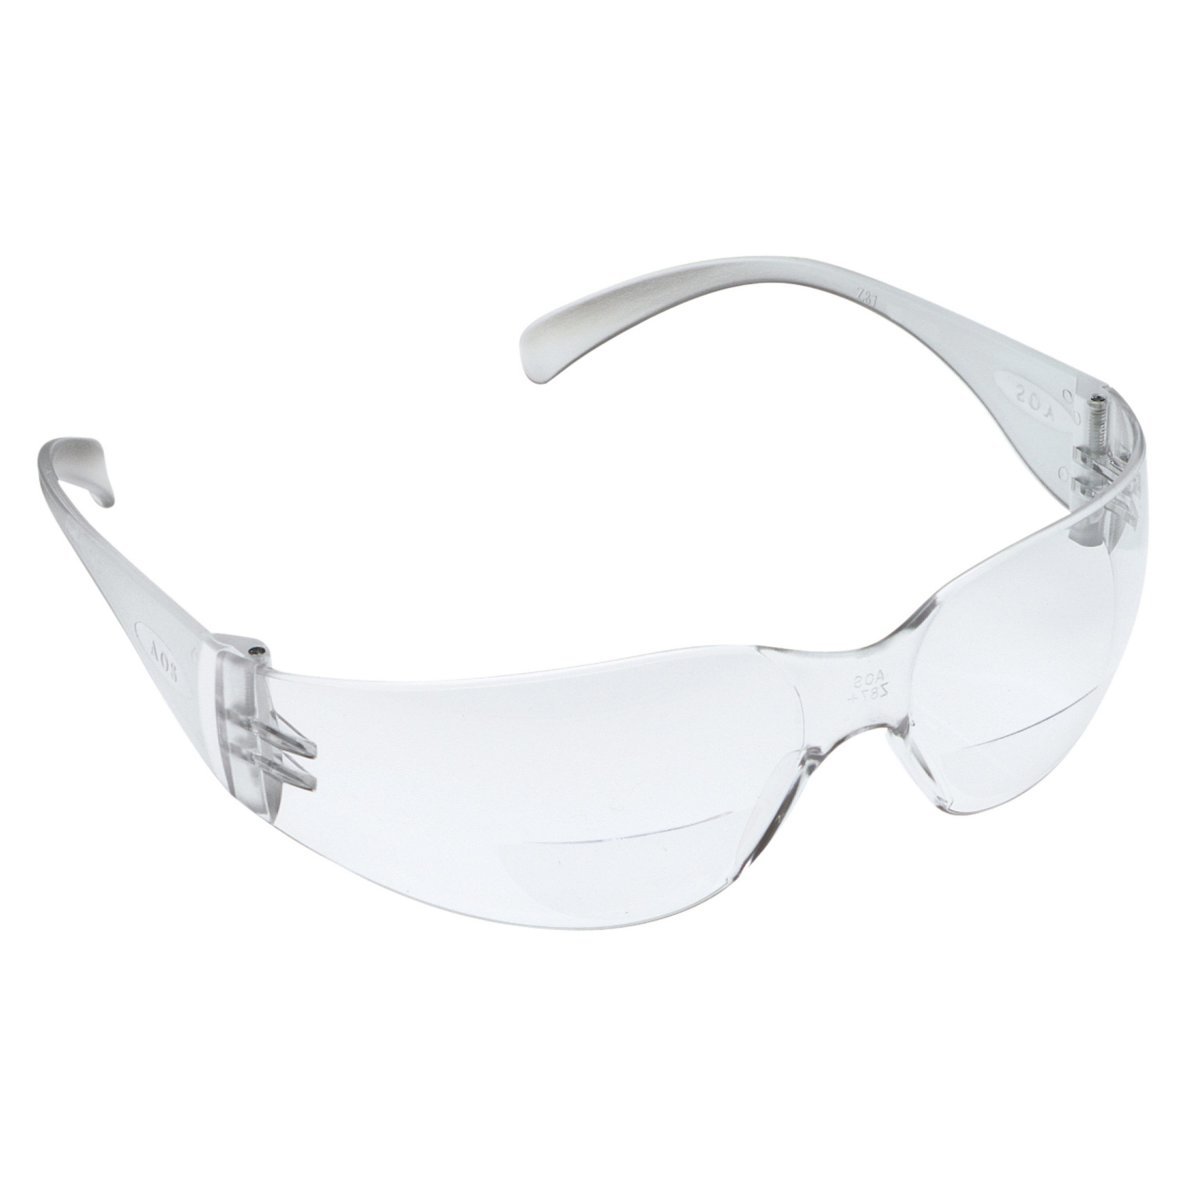 3M™ Virtua™ Reader Protective Eyewear 11514-00000-20 Clear Anti-Fog Lens, Clear Temple, +2.0 Diopter (Availability restrictions